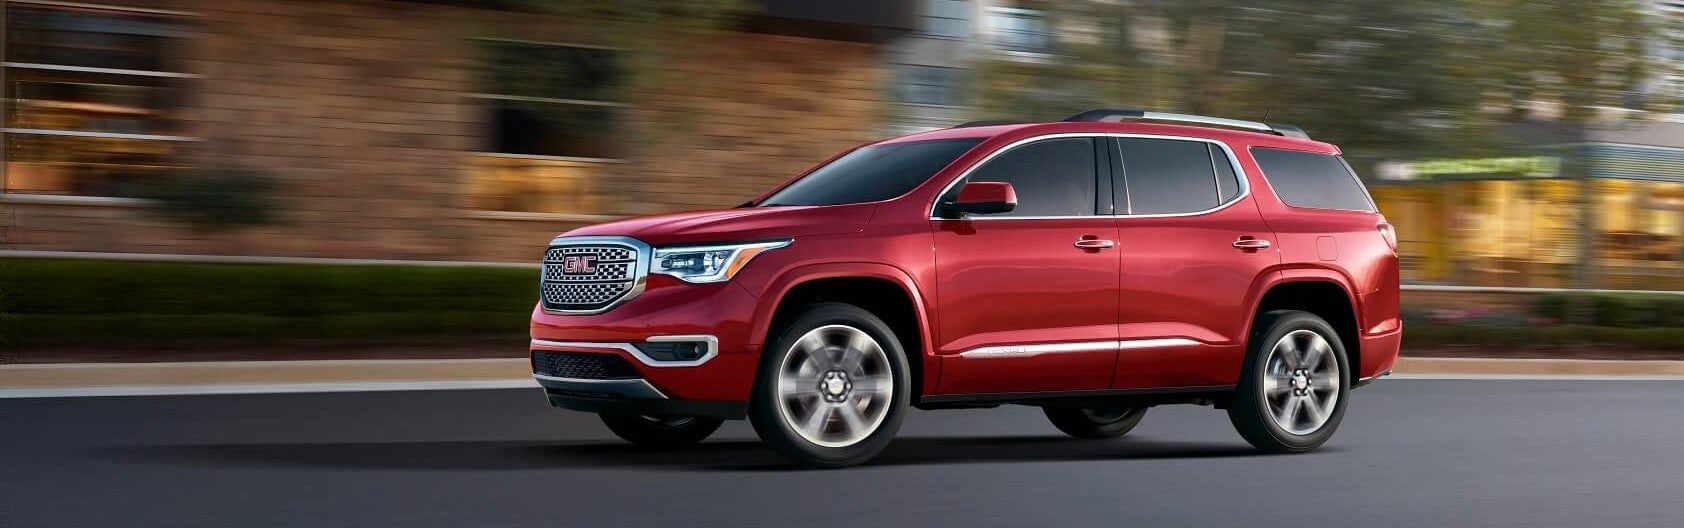 GMC Acadia for Sale near Anderson IN